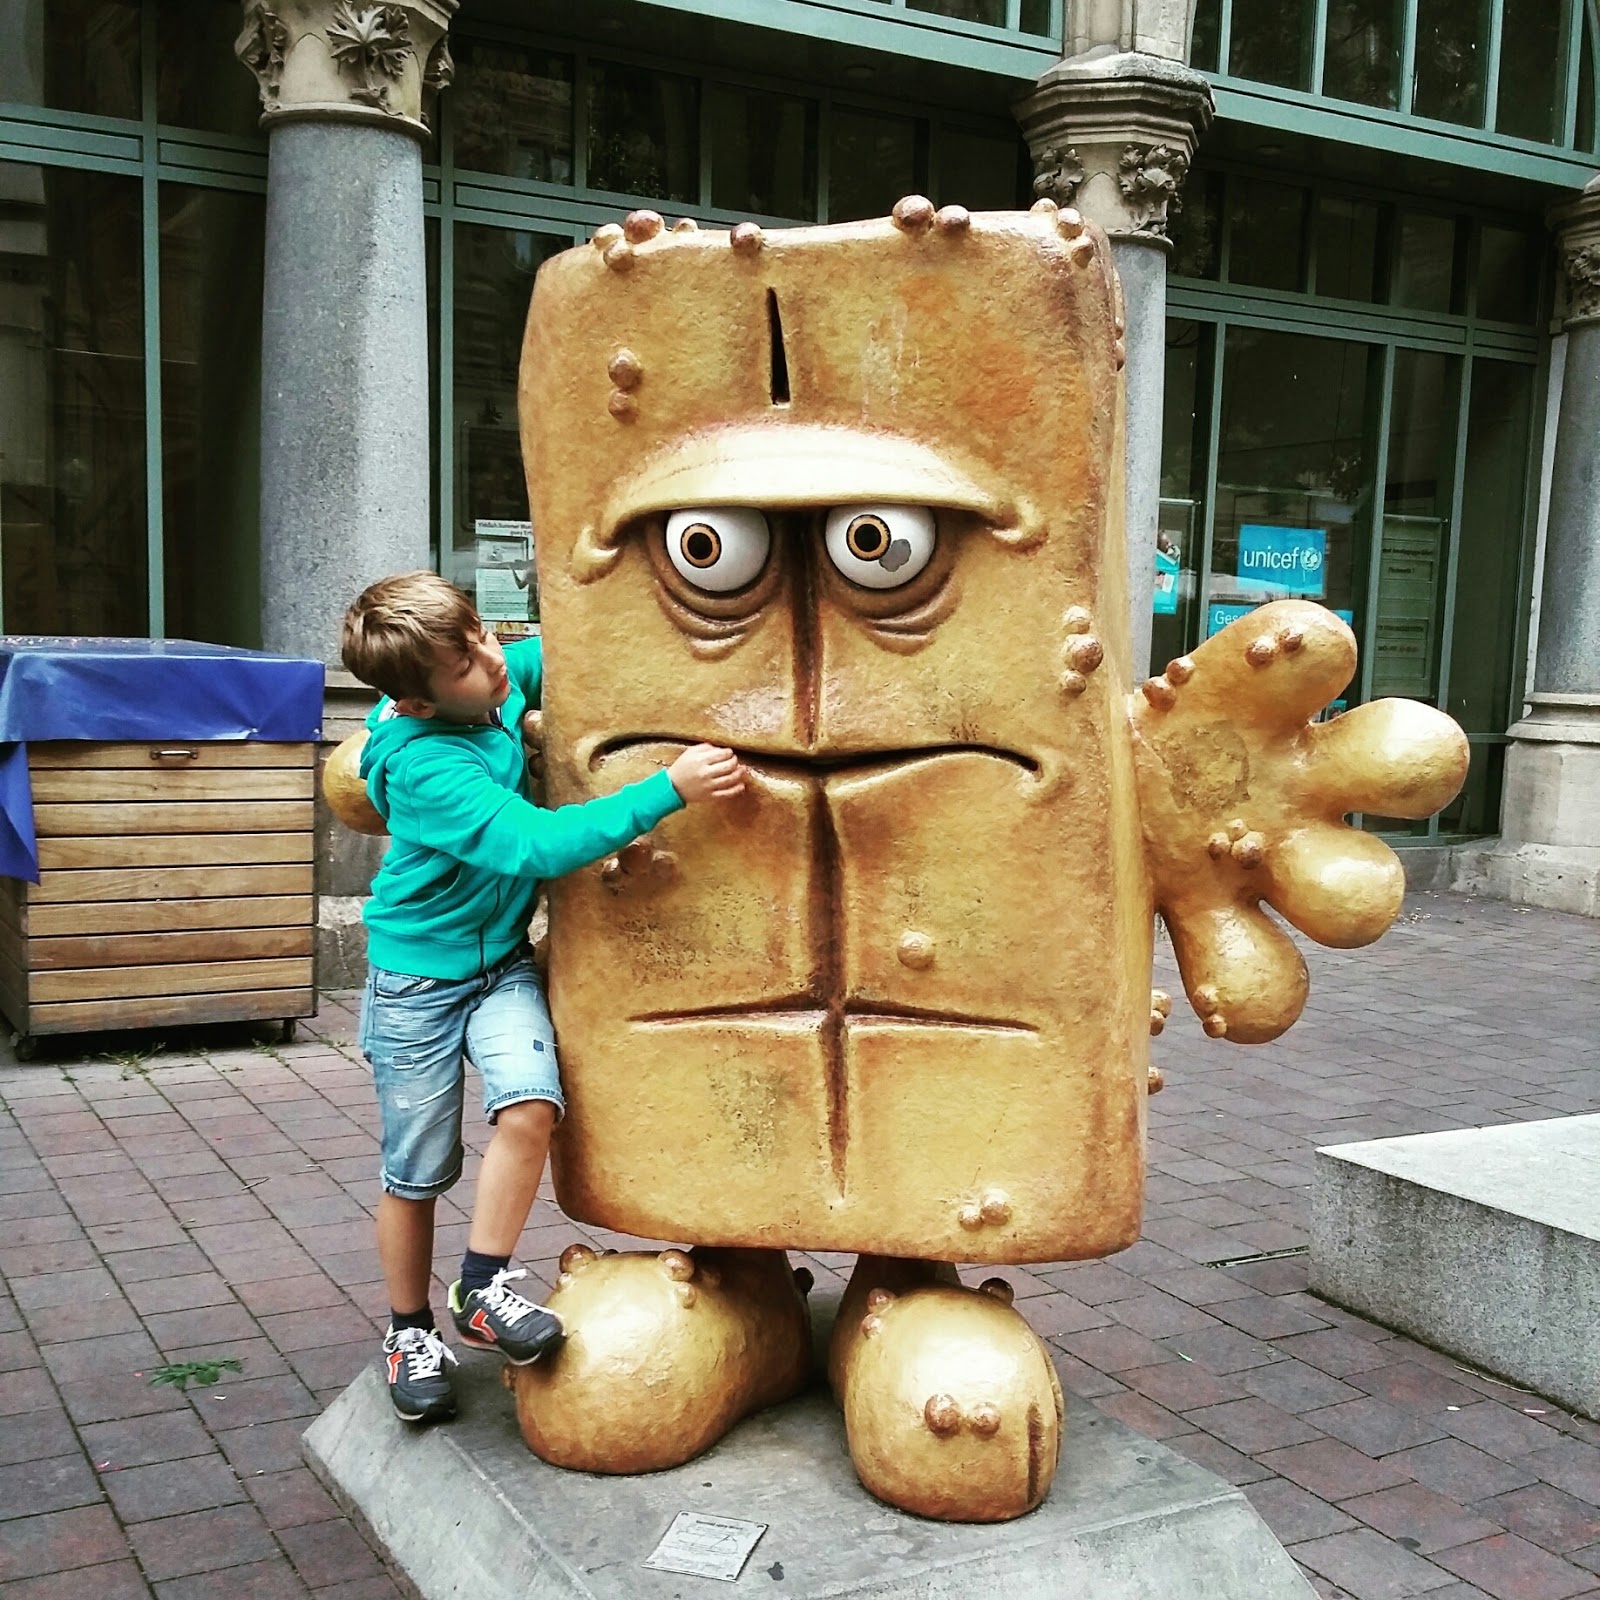 &amp;gt;&amp;gt; Introducing: Bernd Das Brot - Germany&amp;#39;s Most Grumpy Yet Most Beloved ...